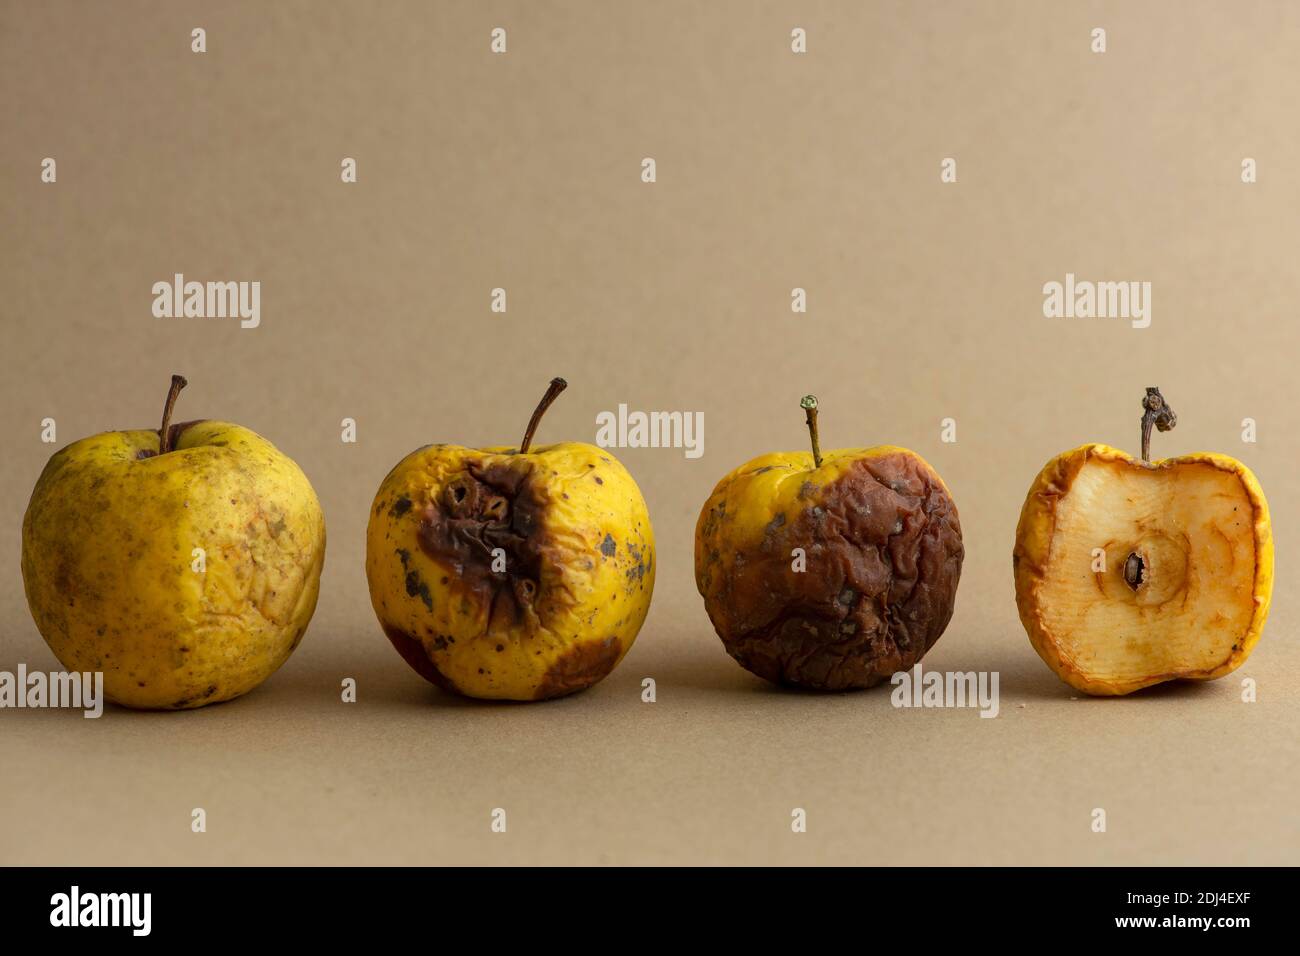 rotten, apple, fruit, bad, old, food, white, spoiled, organic, nature, isolated, natural, background, wrinkled, damaged, decay, fungus, yellow, red, Stock Photo